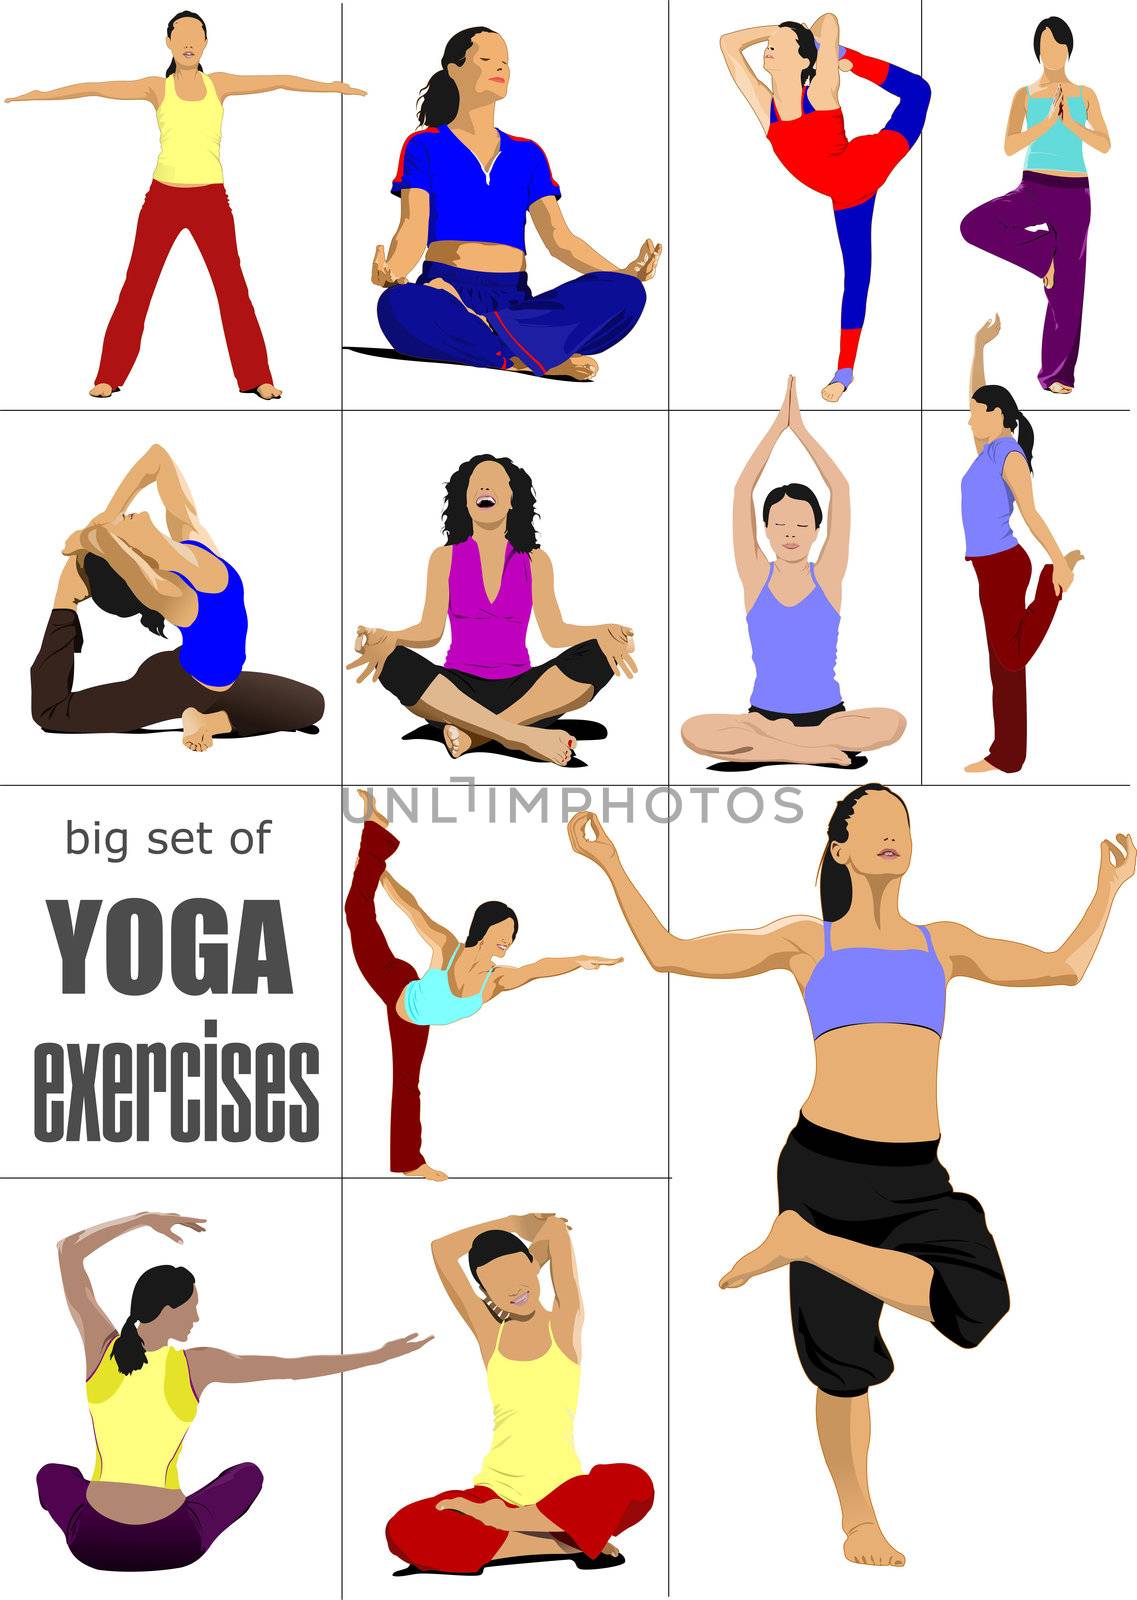 Big set of Yoga exercises - vector poster by leonido